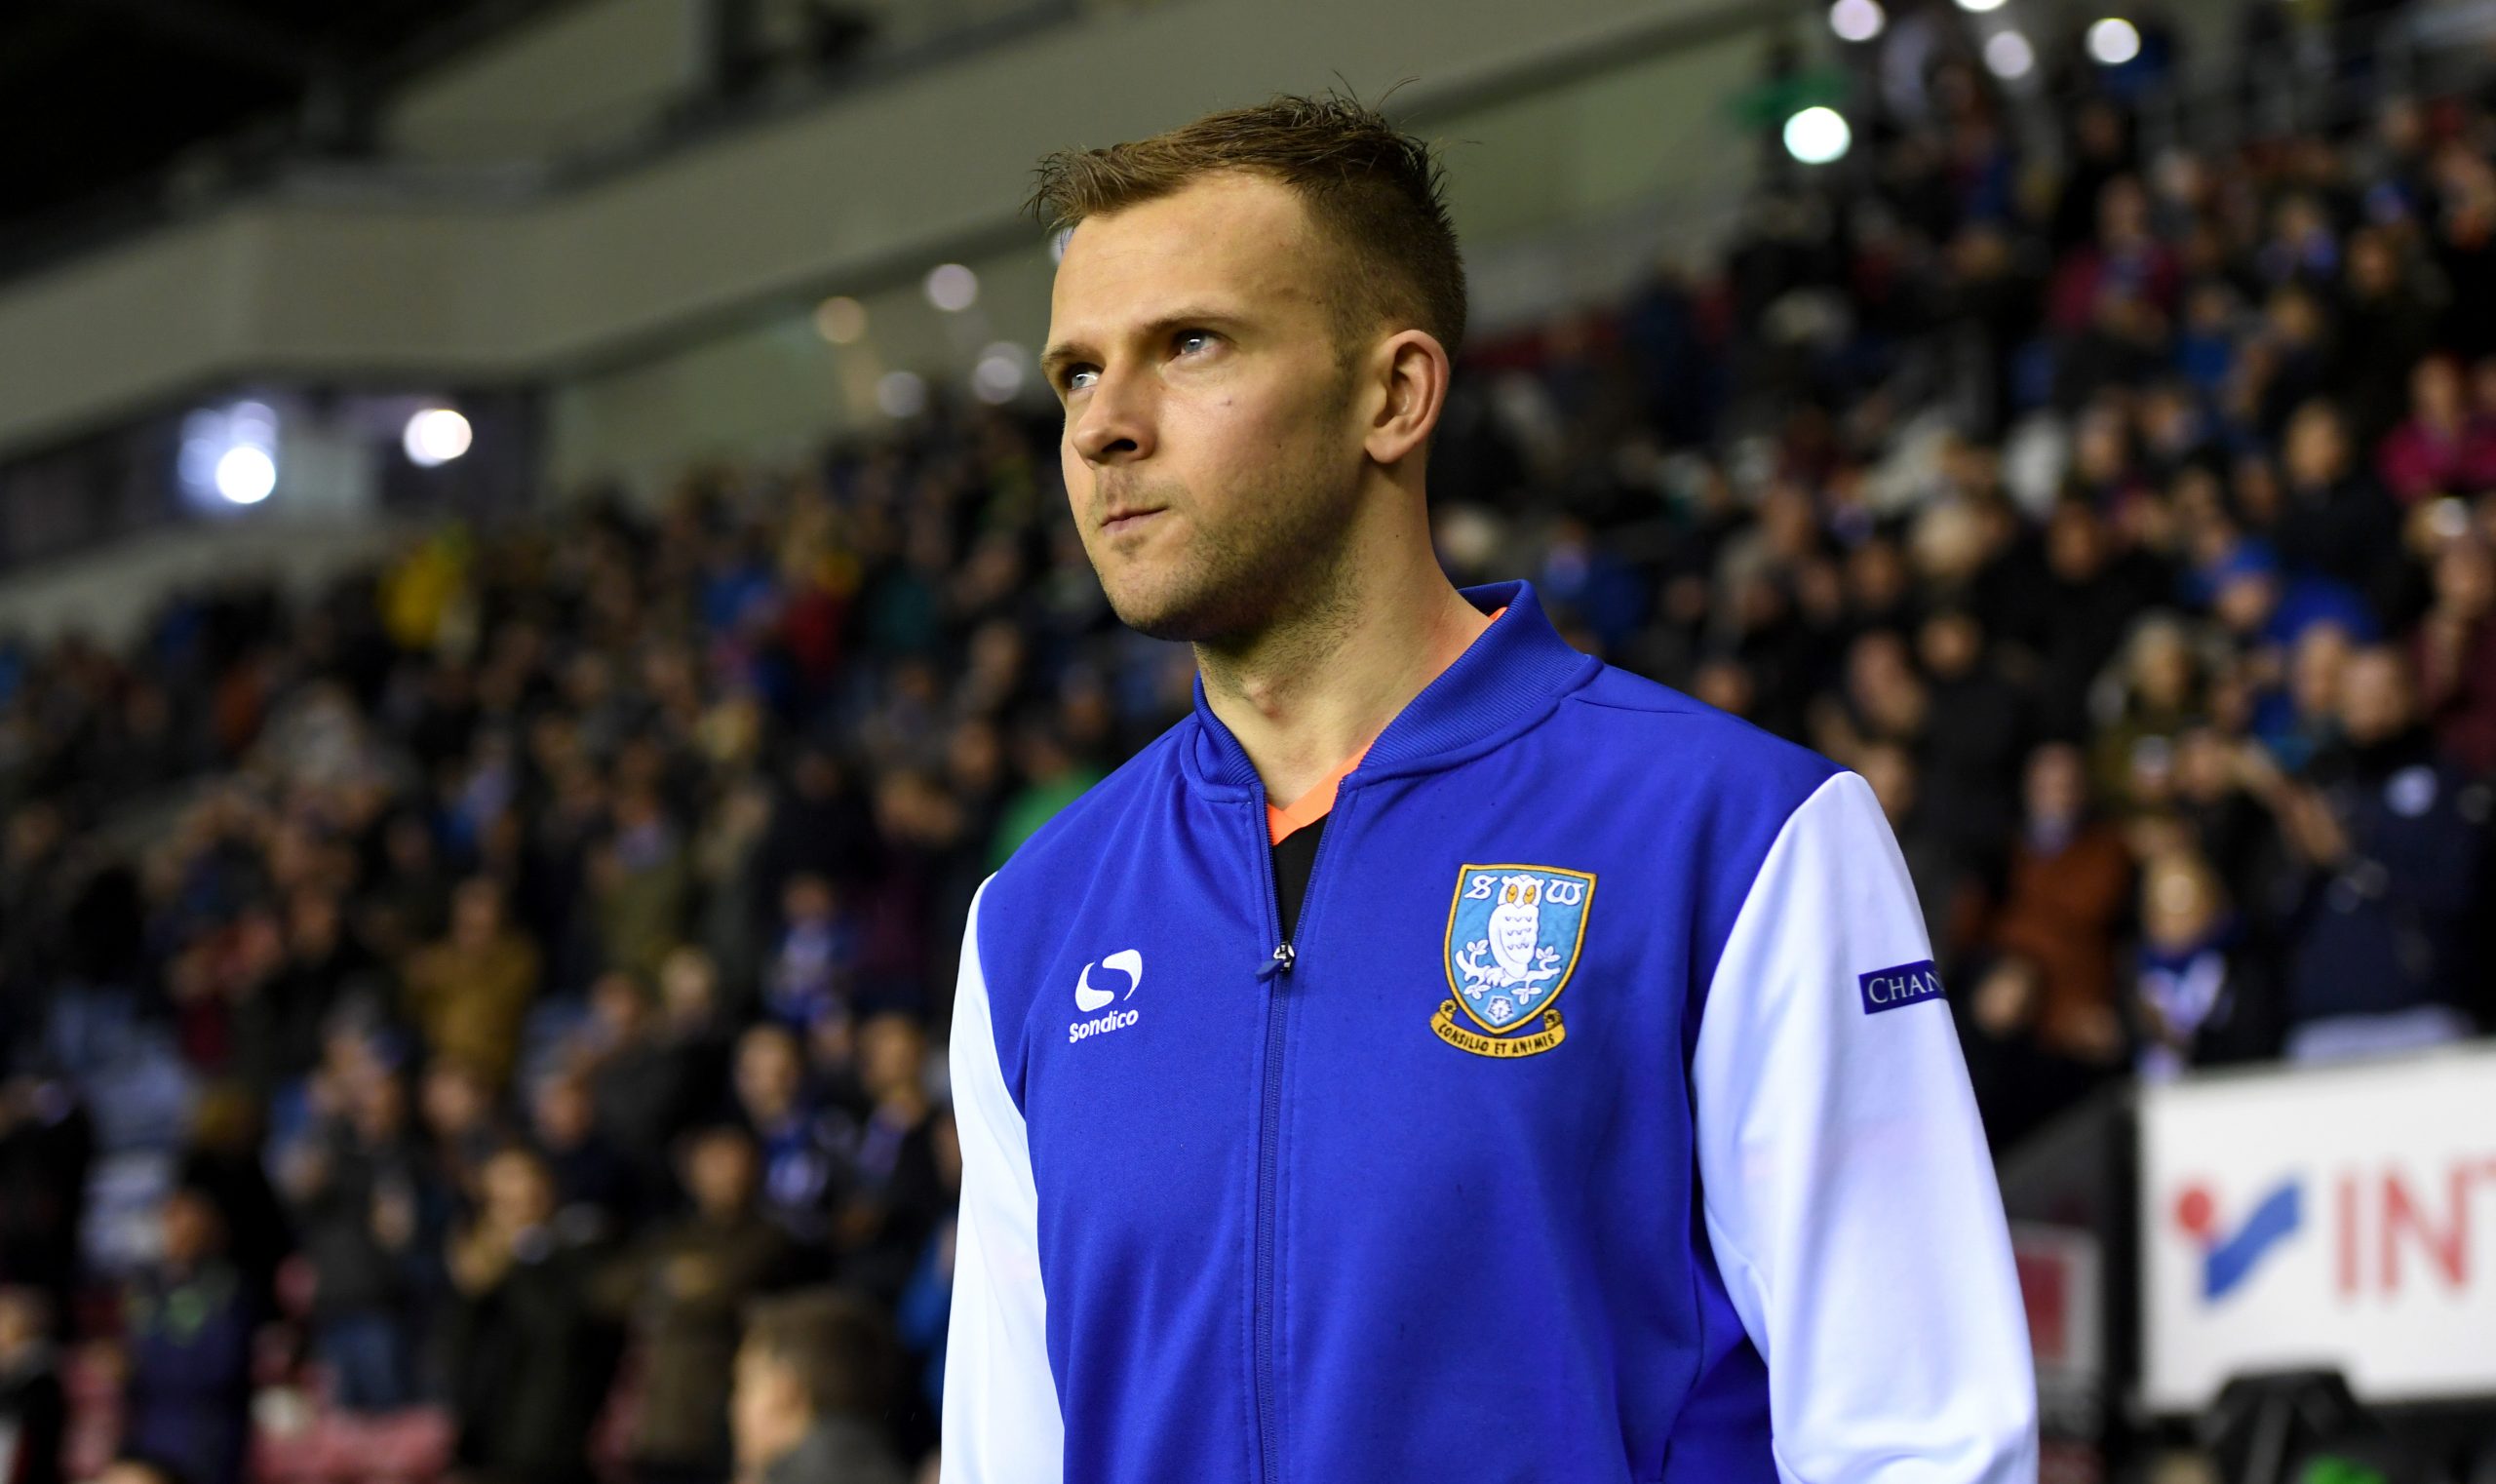 WIGAN, ENGLAND - FEBRUARY 03: Jordan Rhodes of Sheffield Wednesday  during the Sky Bet Championship match between Wigan Athletic and Sheffield Wednesday at DW Stadium on February 3, 2017 in Wigan, England.  (Photo by Gareth Copley/Getty Images)